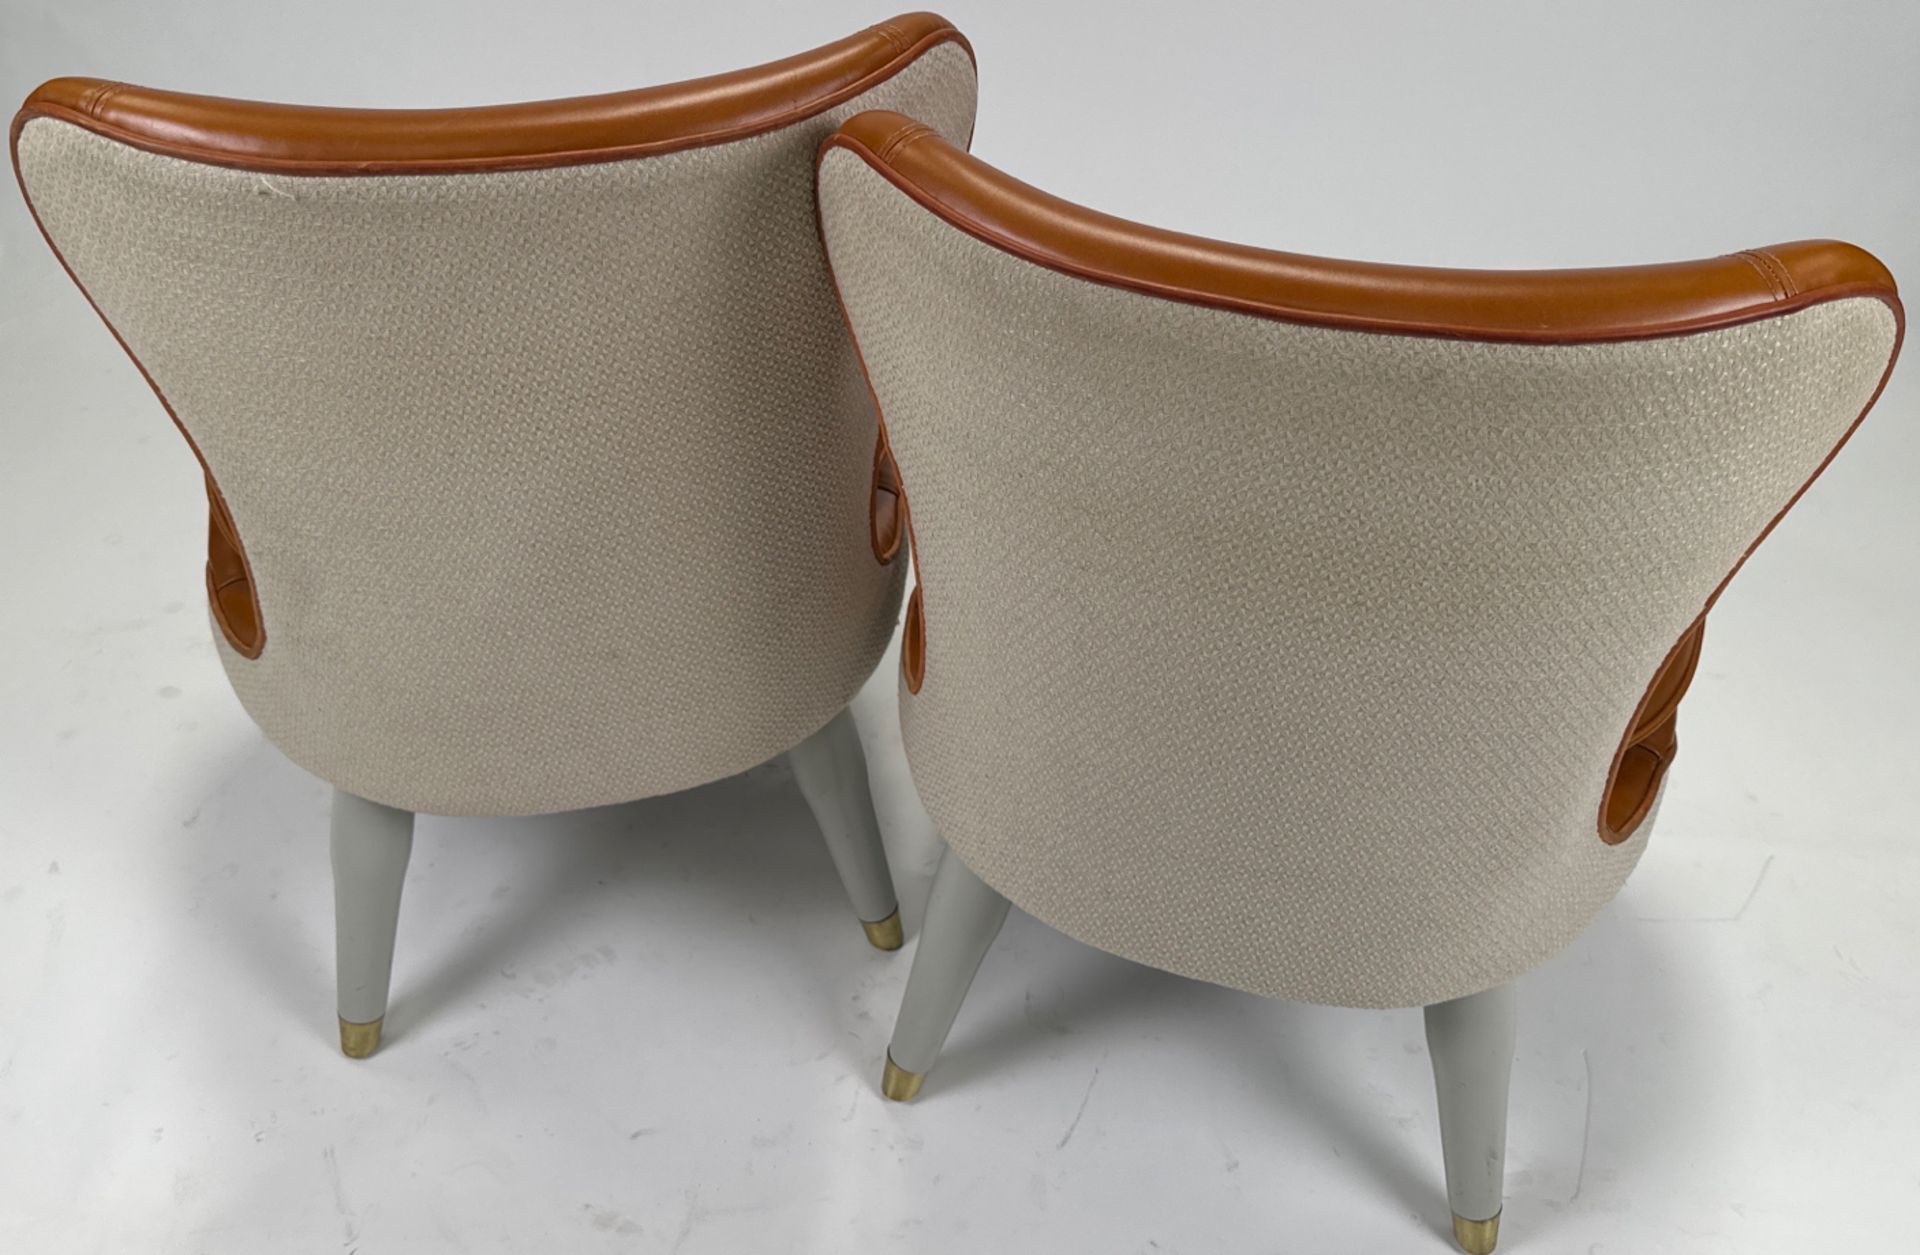 Pair of Ben Whistler Chairs Commissioned by Robert Angell Designed for The Berkeley - Image 5 of 5